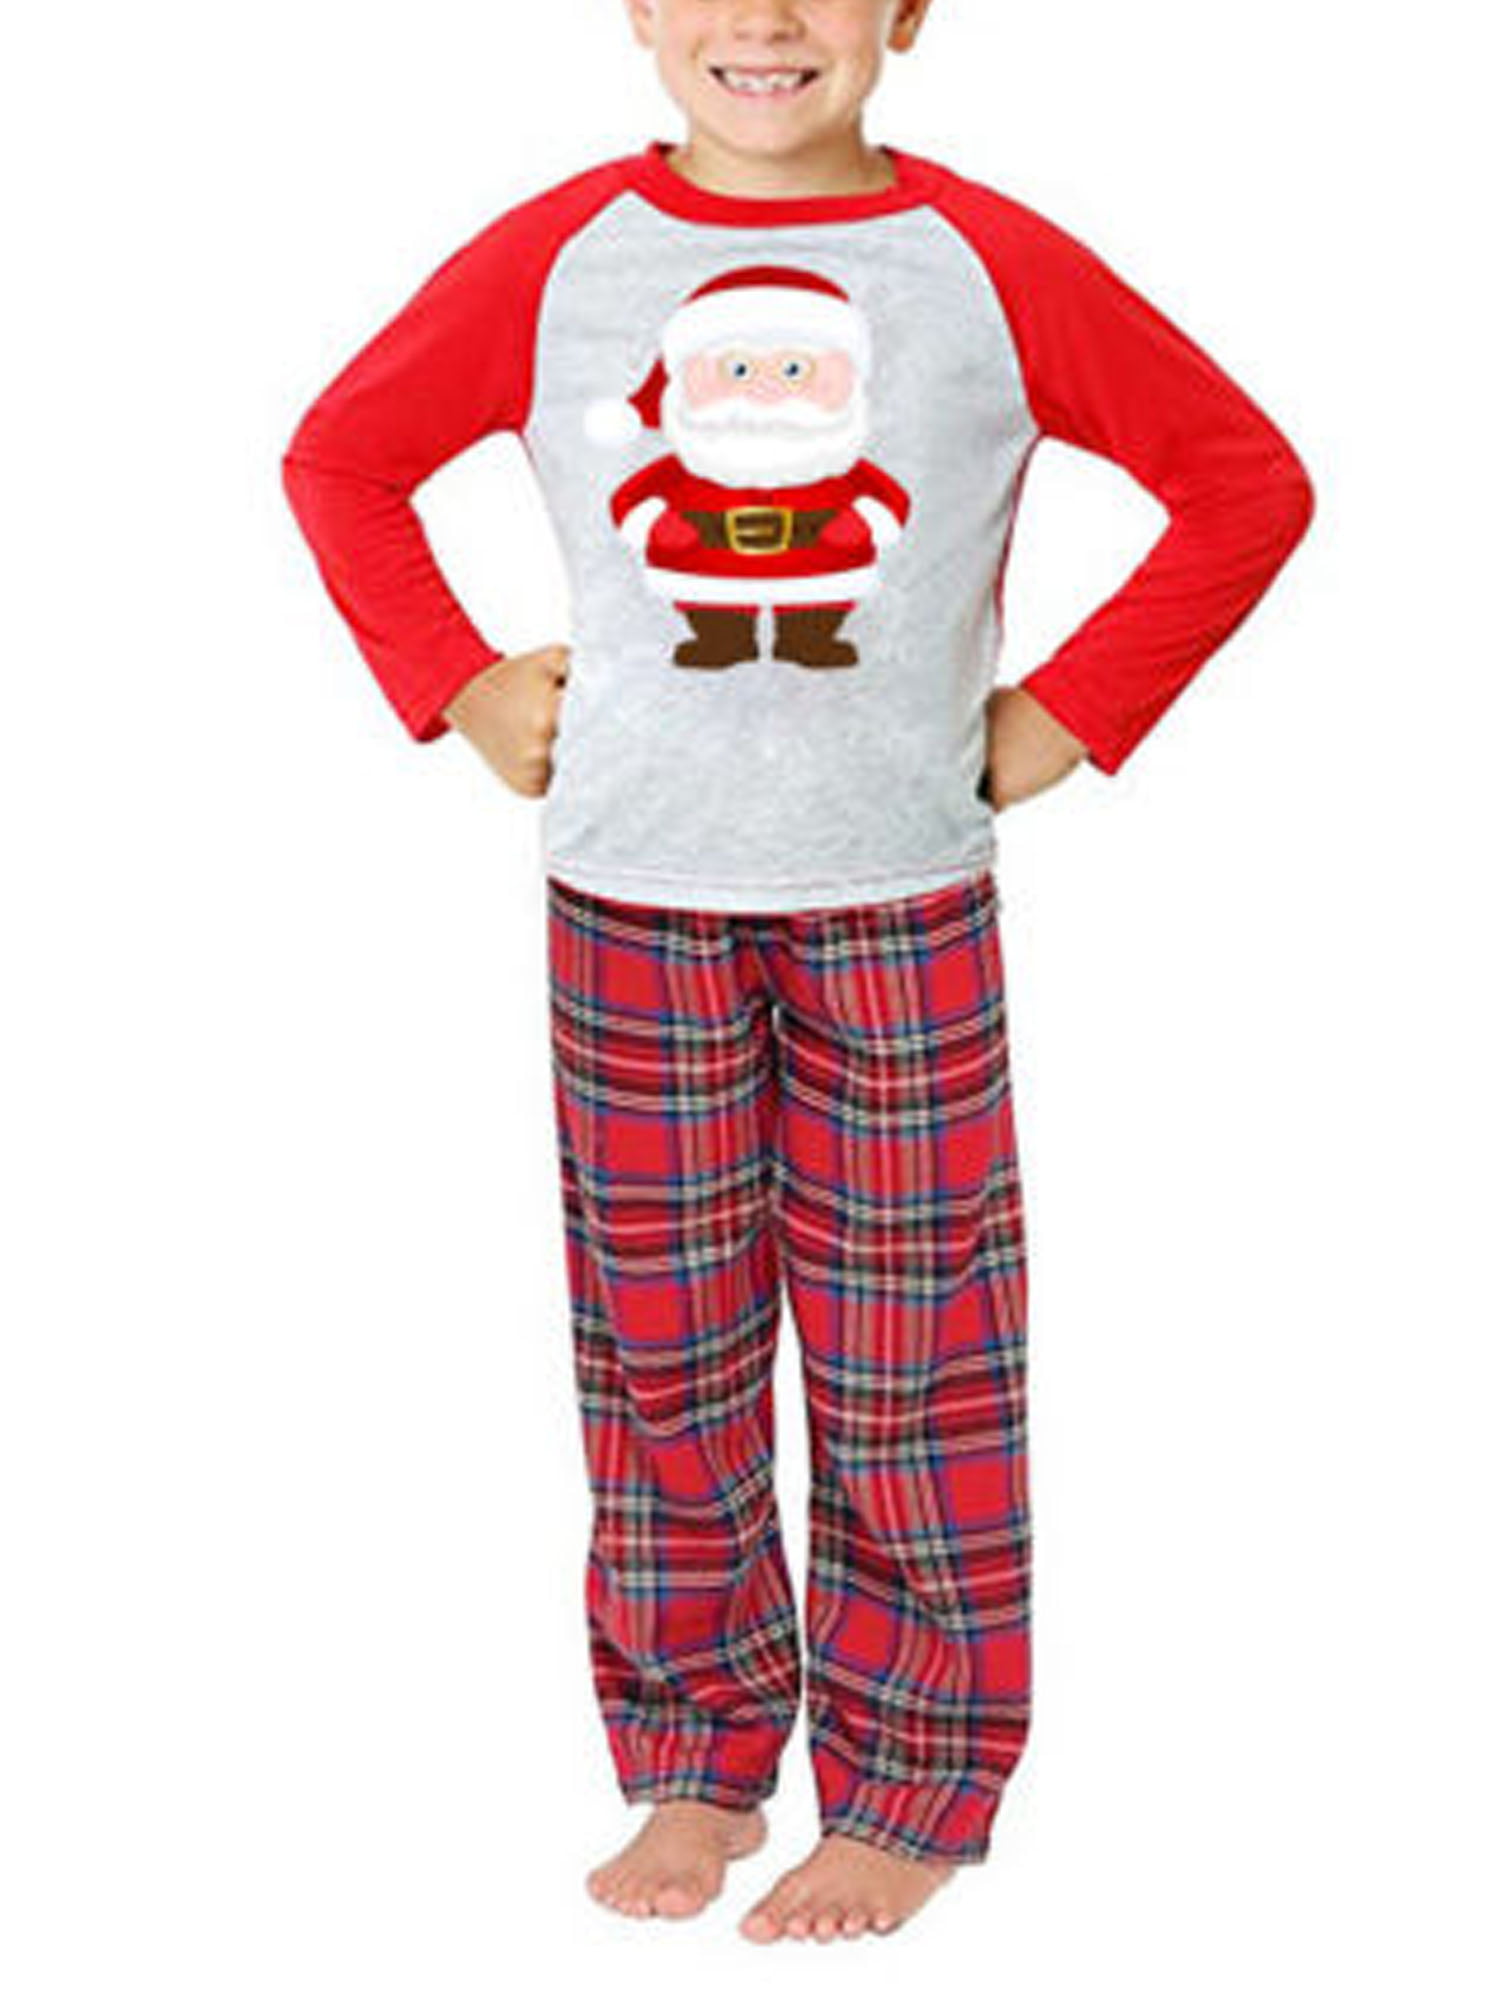 Rudolph Matching Family Christmas Pajamas Unisex Kids Rudolph Hooded Union Suit